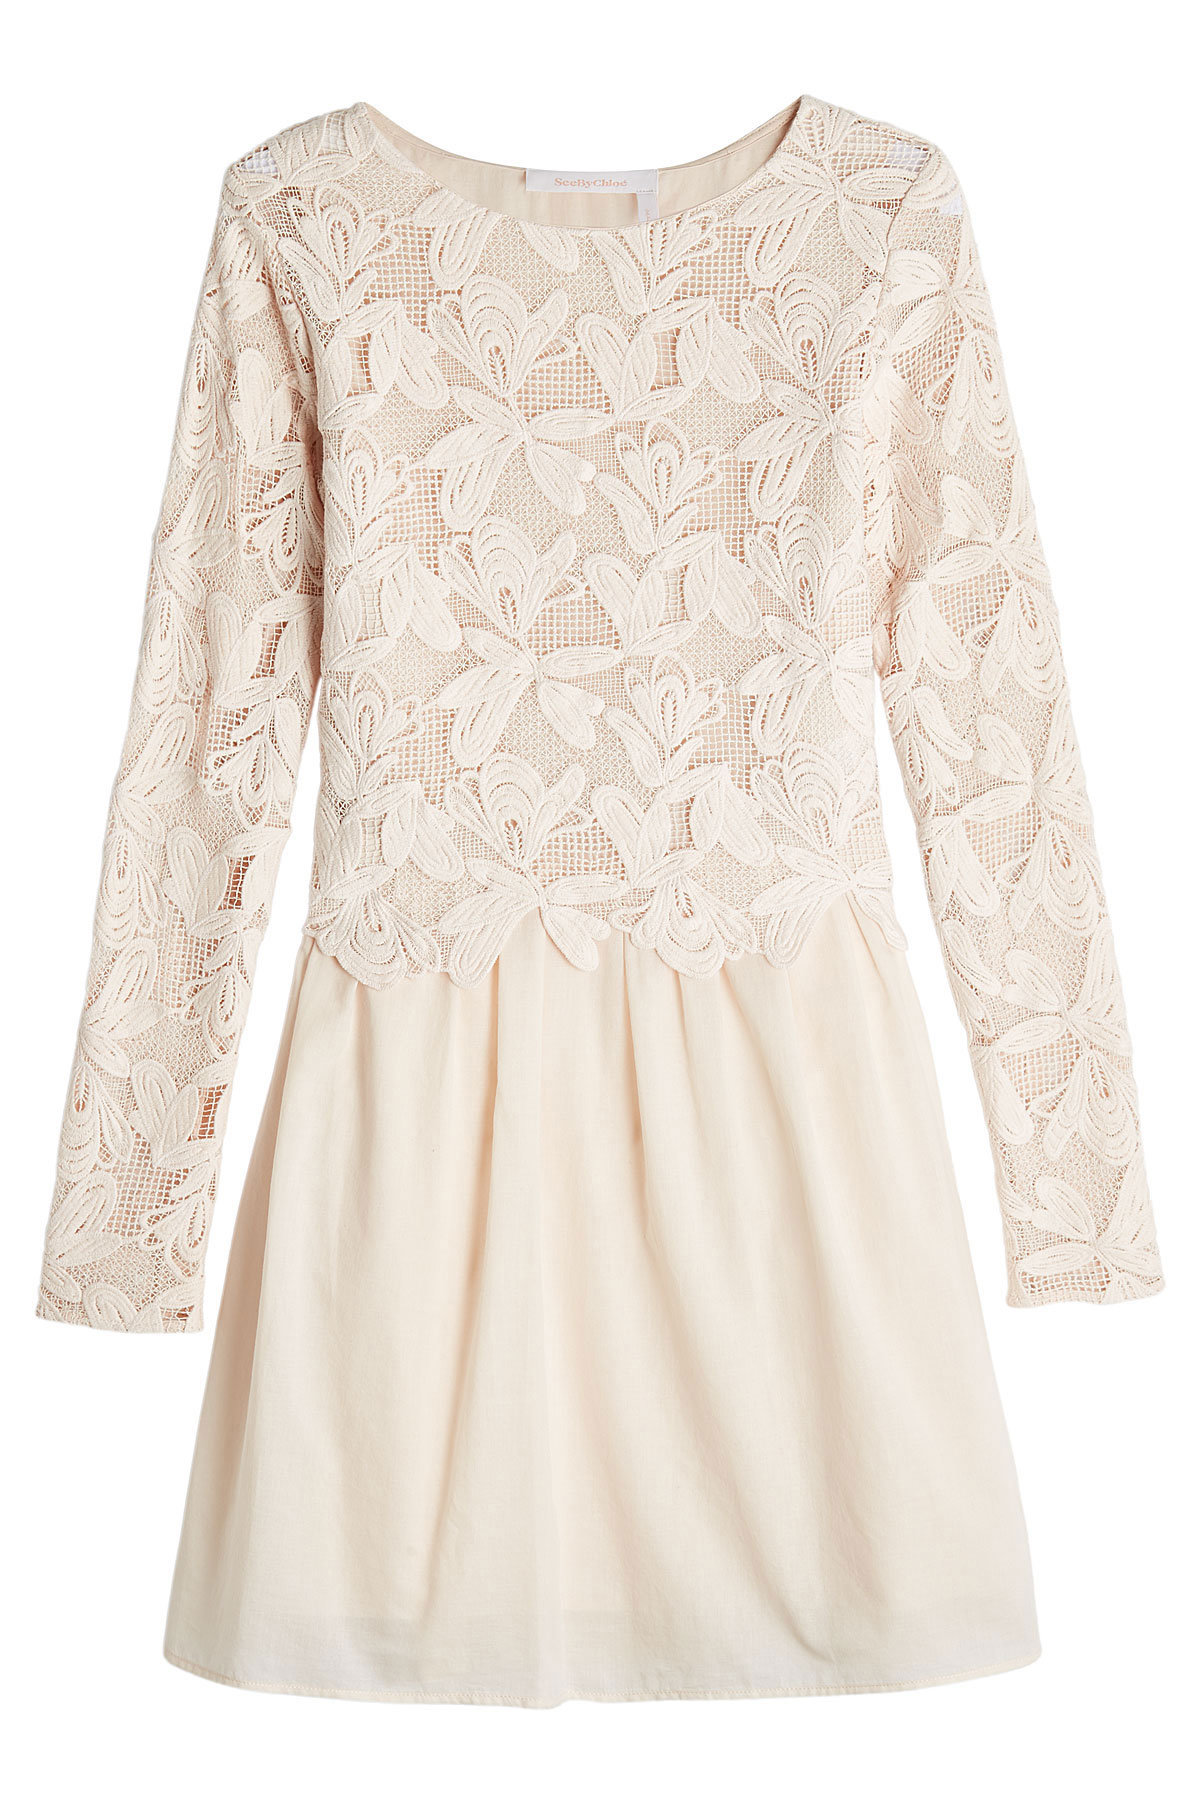 See by Chloe - Lace and Cotton Mini Dress